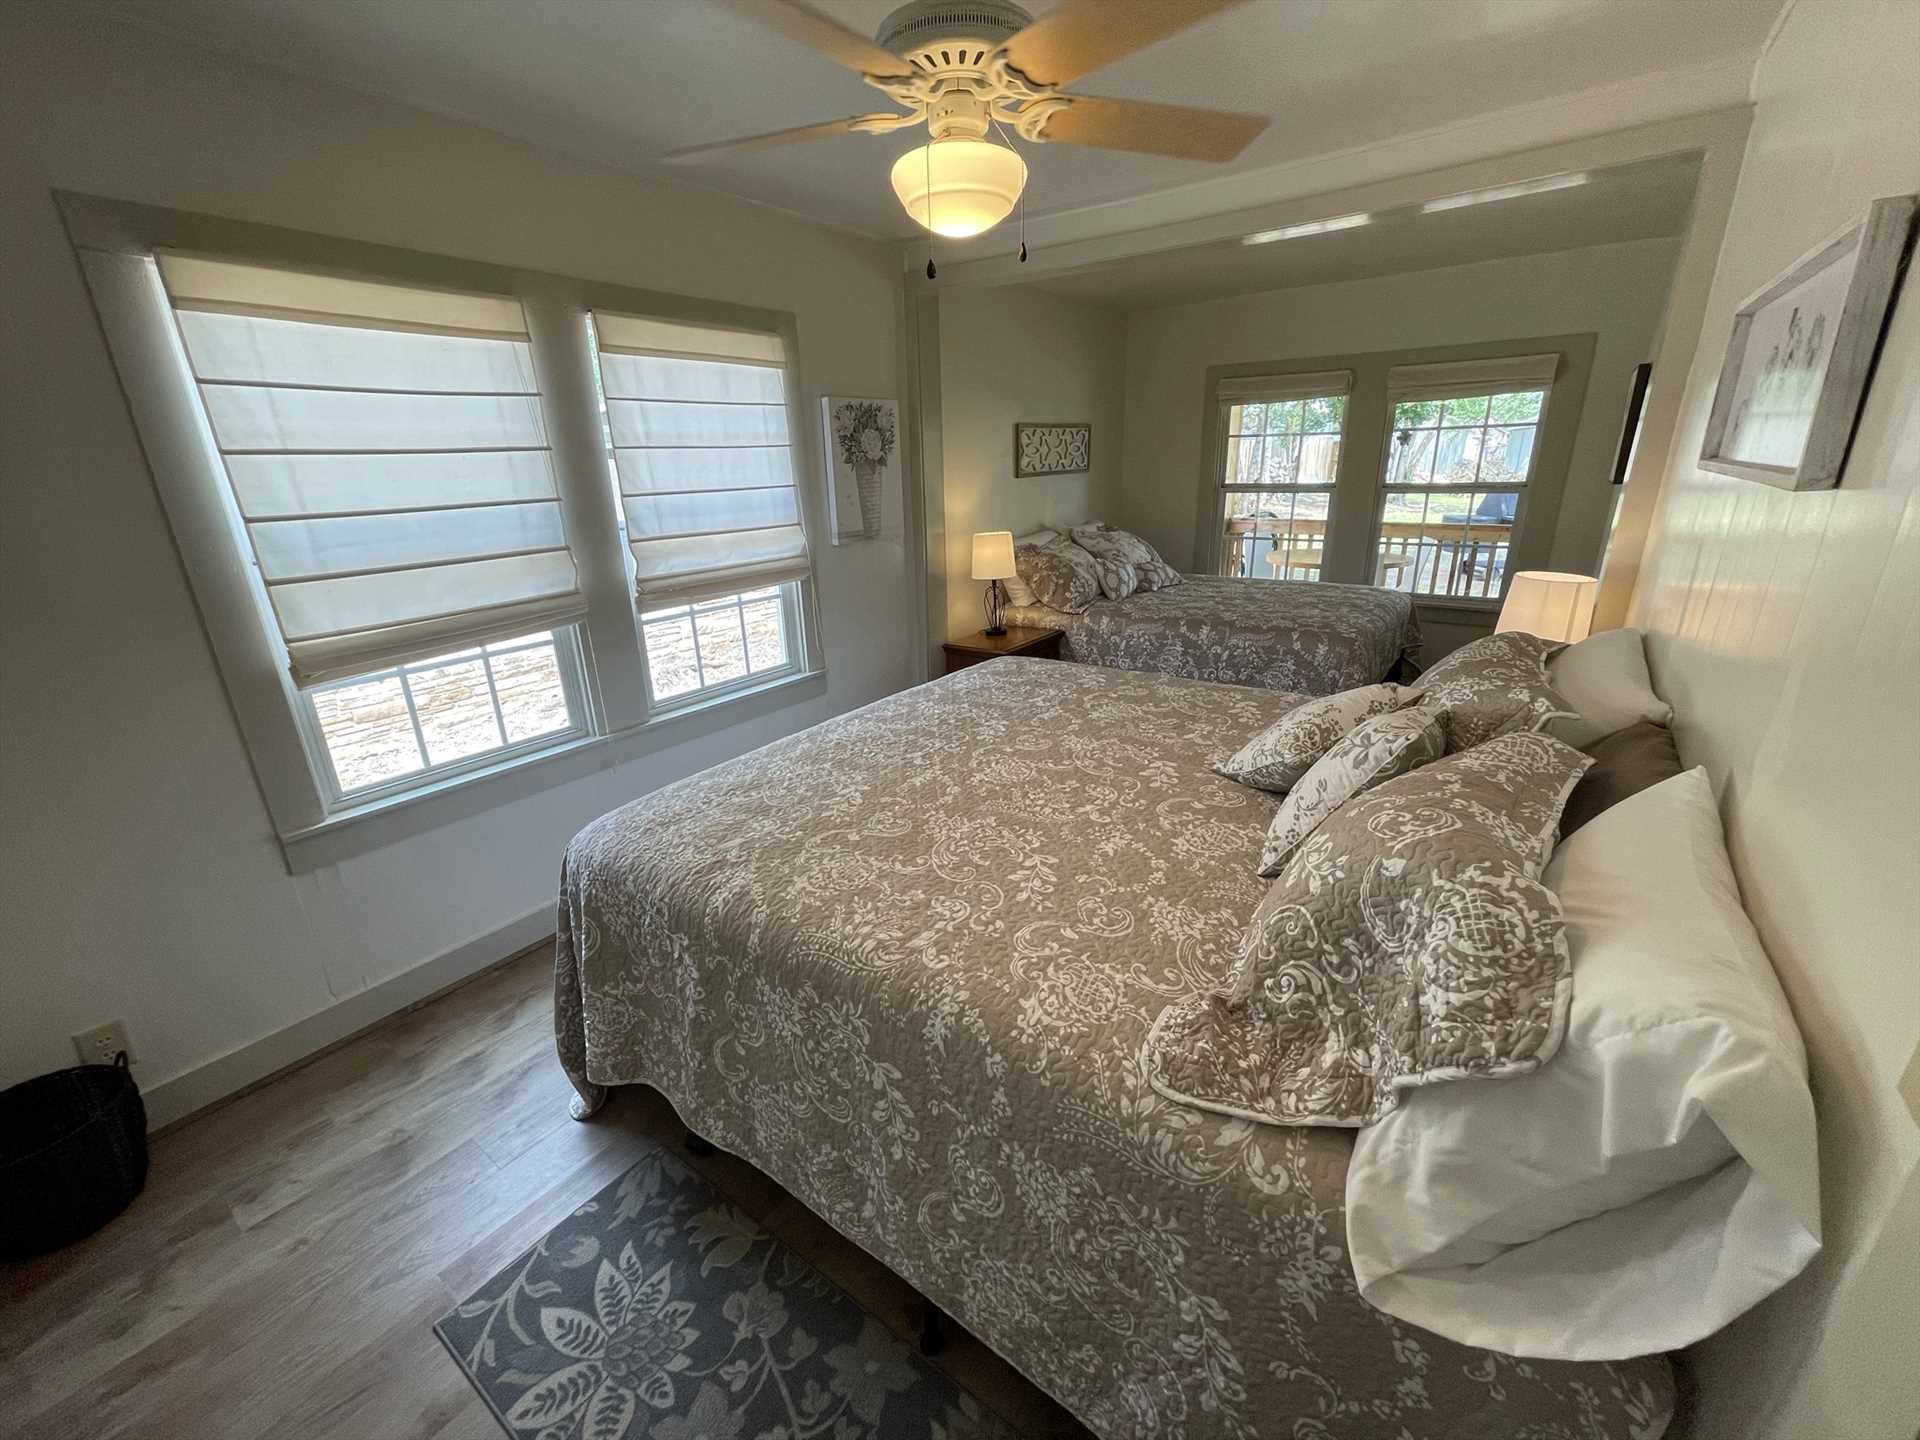                                                 A light and airy setting embraces you in the master bedroom, with roomy king and queen beds. Soft and clean linens are also included!